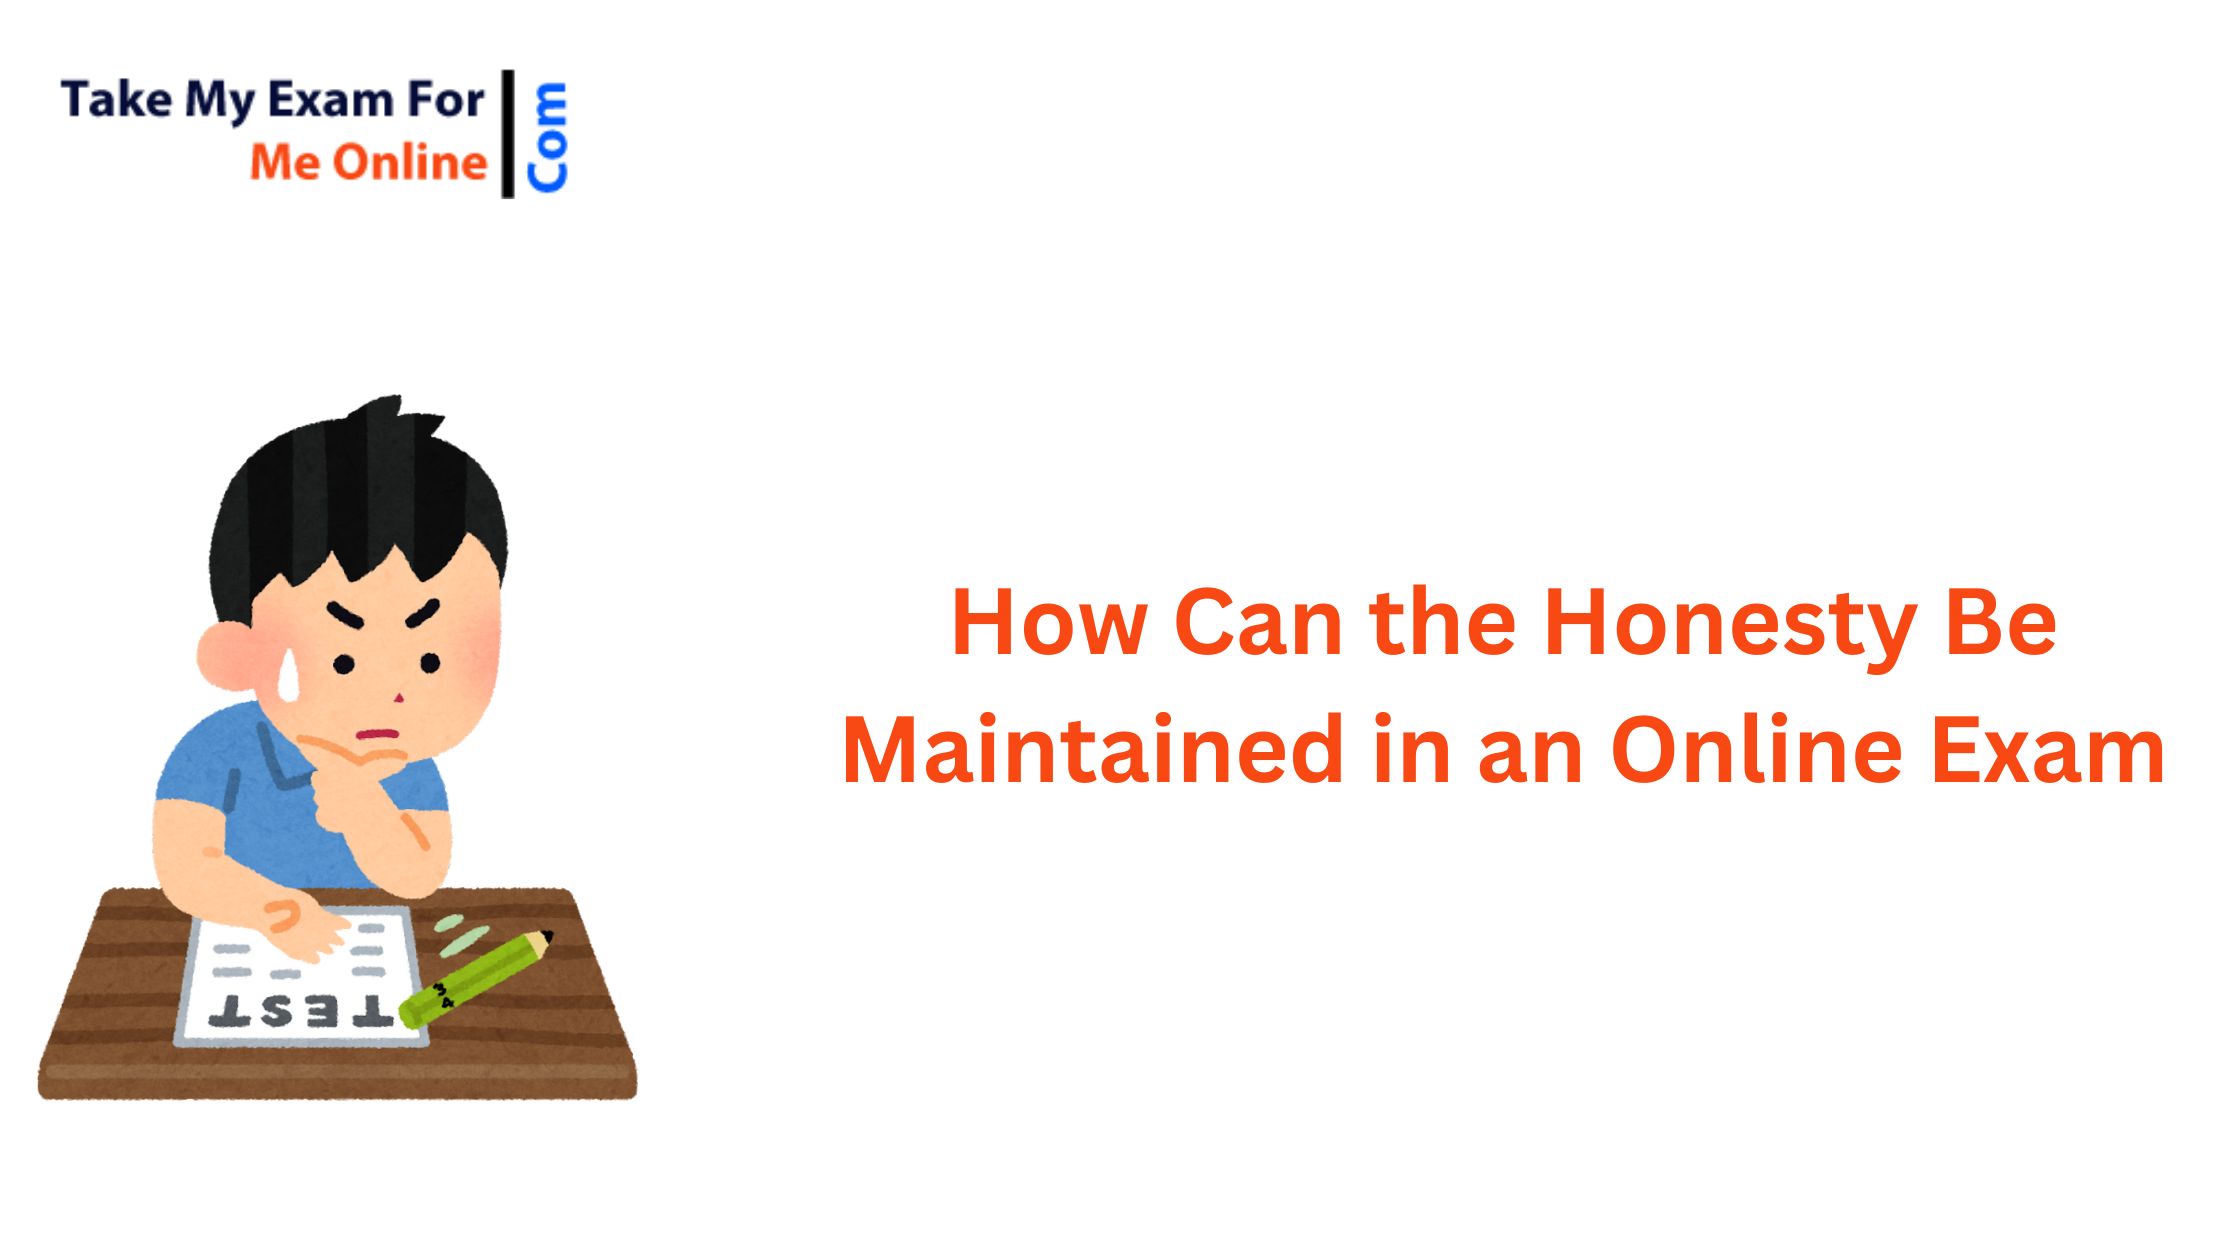 How Can the Honesty Be Maintained in an Online Exam